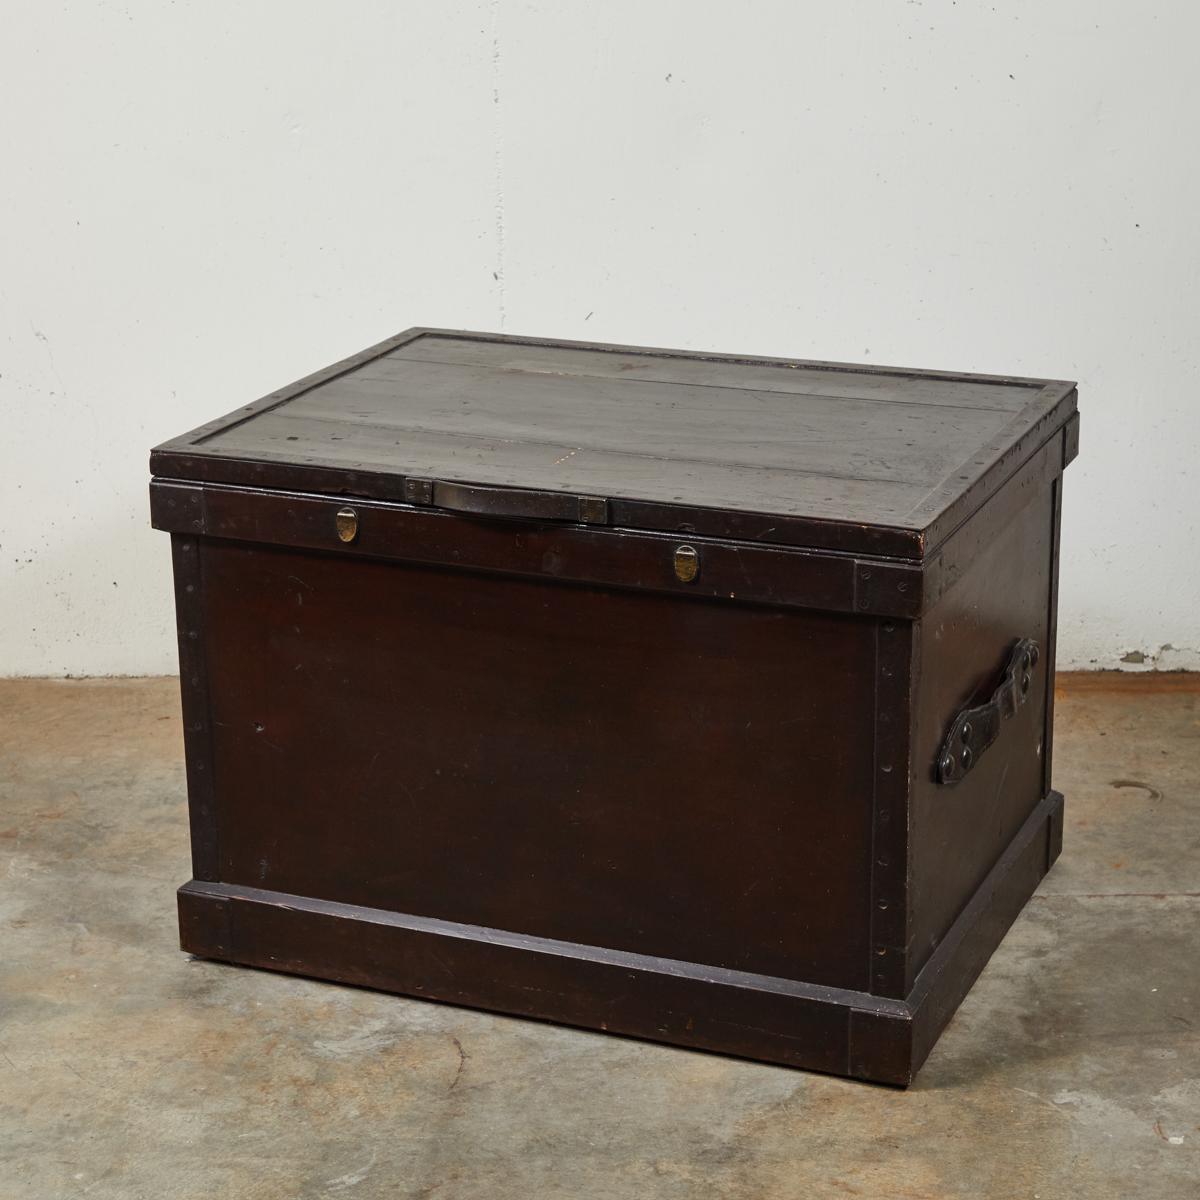 Large camphorwood silver chest from late 19th-century England. Stained to a deep, rich, mahogany shade, and featuring leather handles and studded iron siding, the chest has a sturdy, handsome feel. May be used as small coffee table or chest for